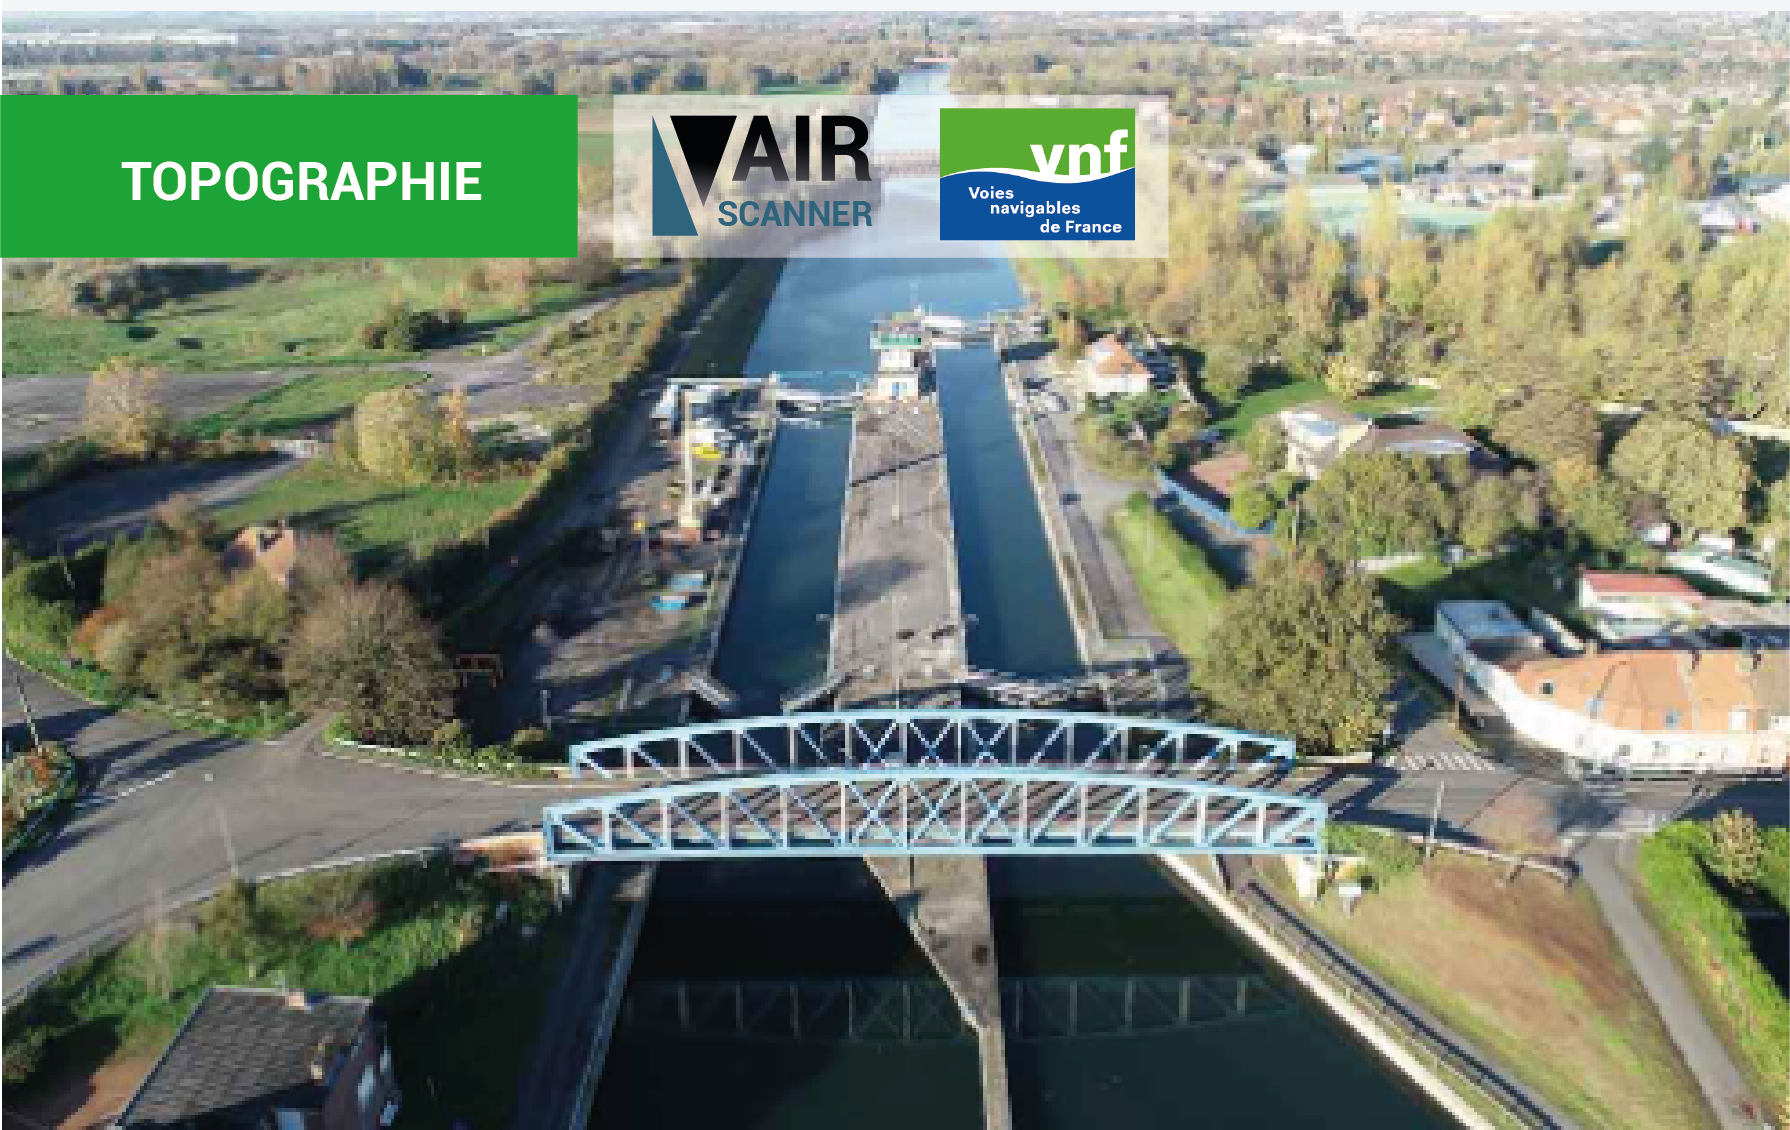 vnf-topographie-canal